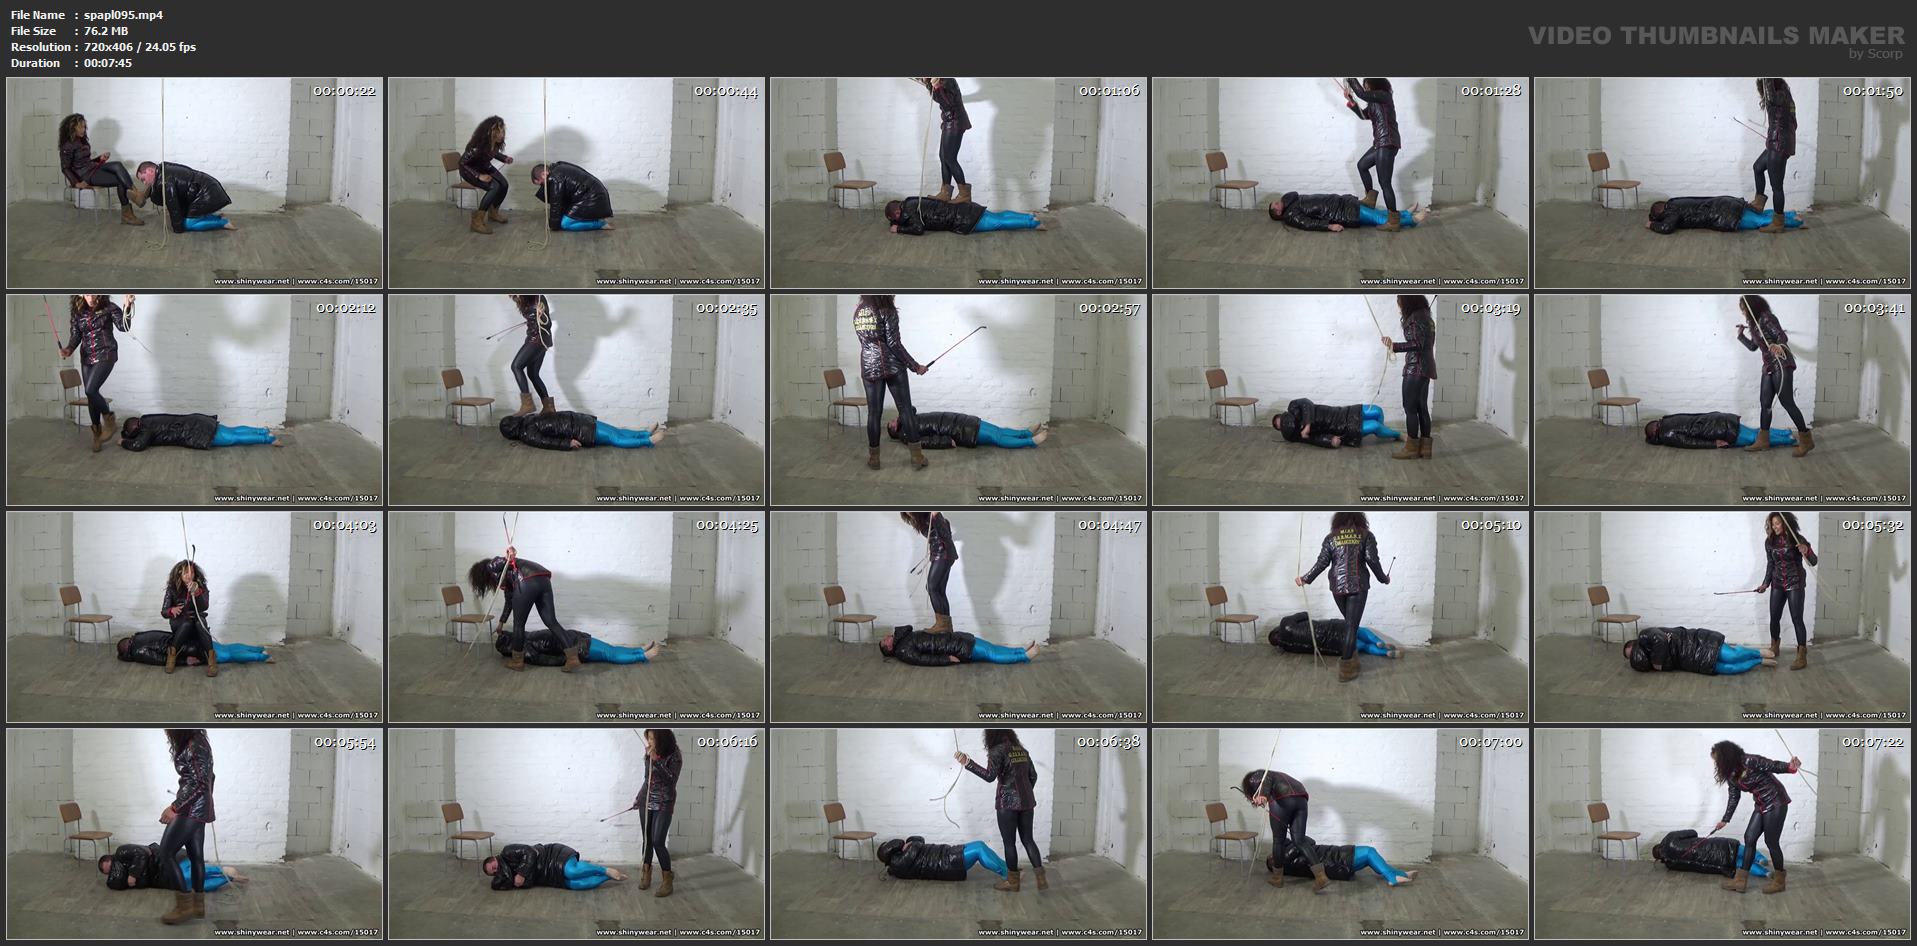 Dama Cesara - Boot worship, hard whipping and trampling - SPANDEX PLANET FEMDOM - SD/406p/MP4